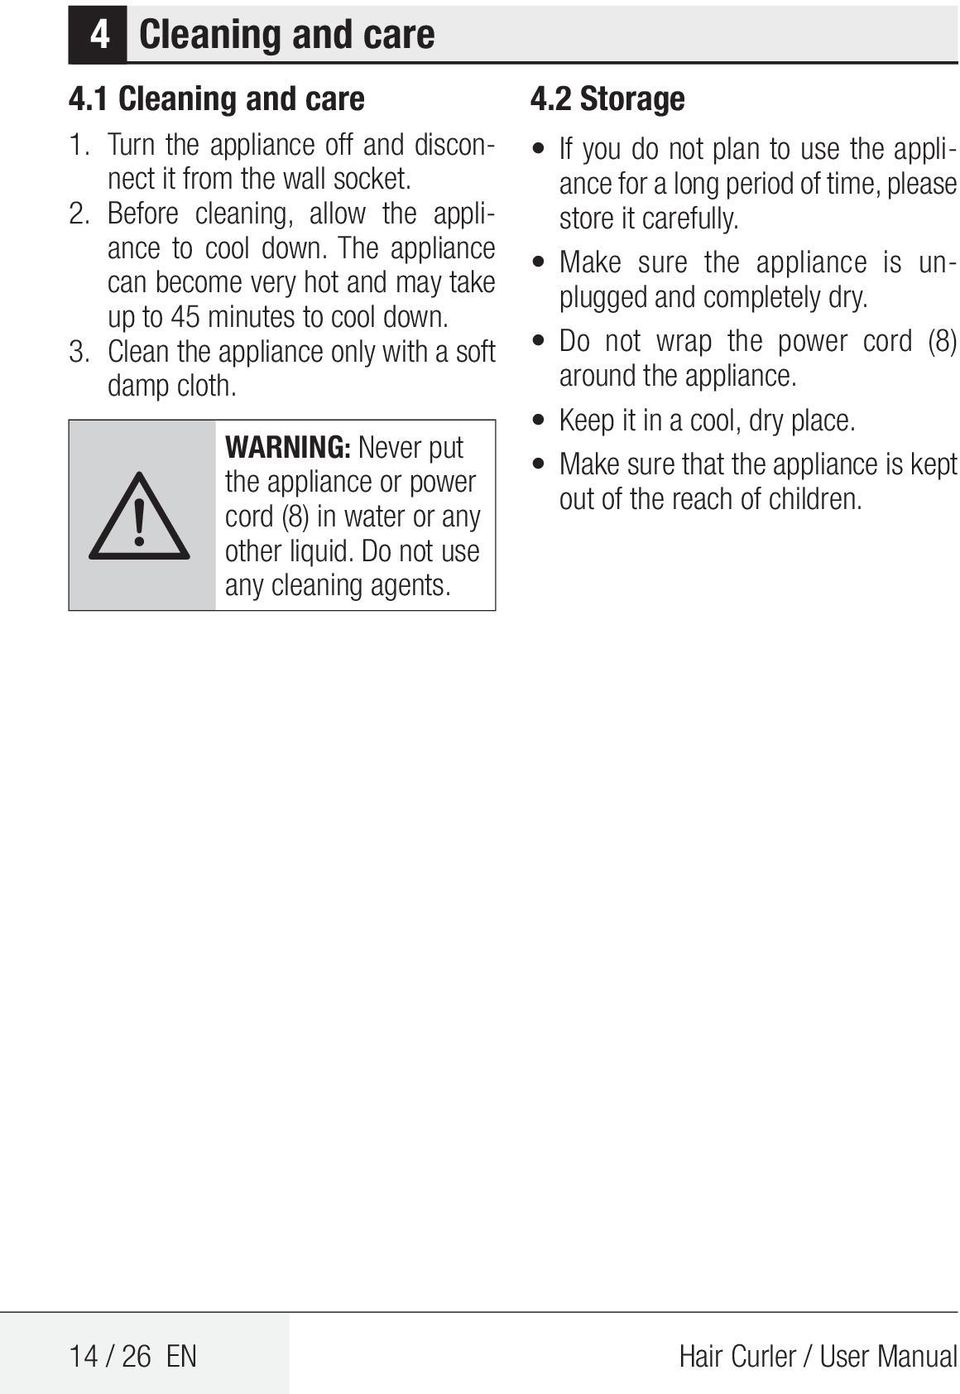 A WARNING: Never put the appliance or power cord (8) in water or any other liquid. Do not use any cleaning agents. 4.